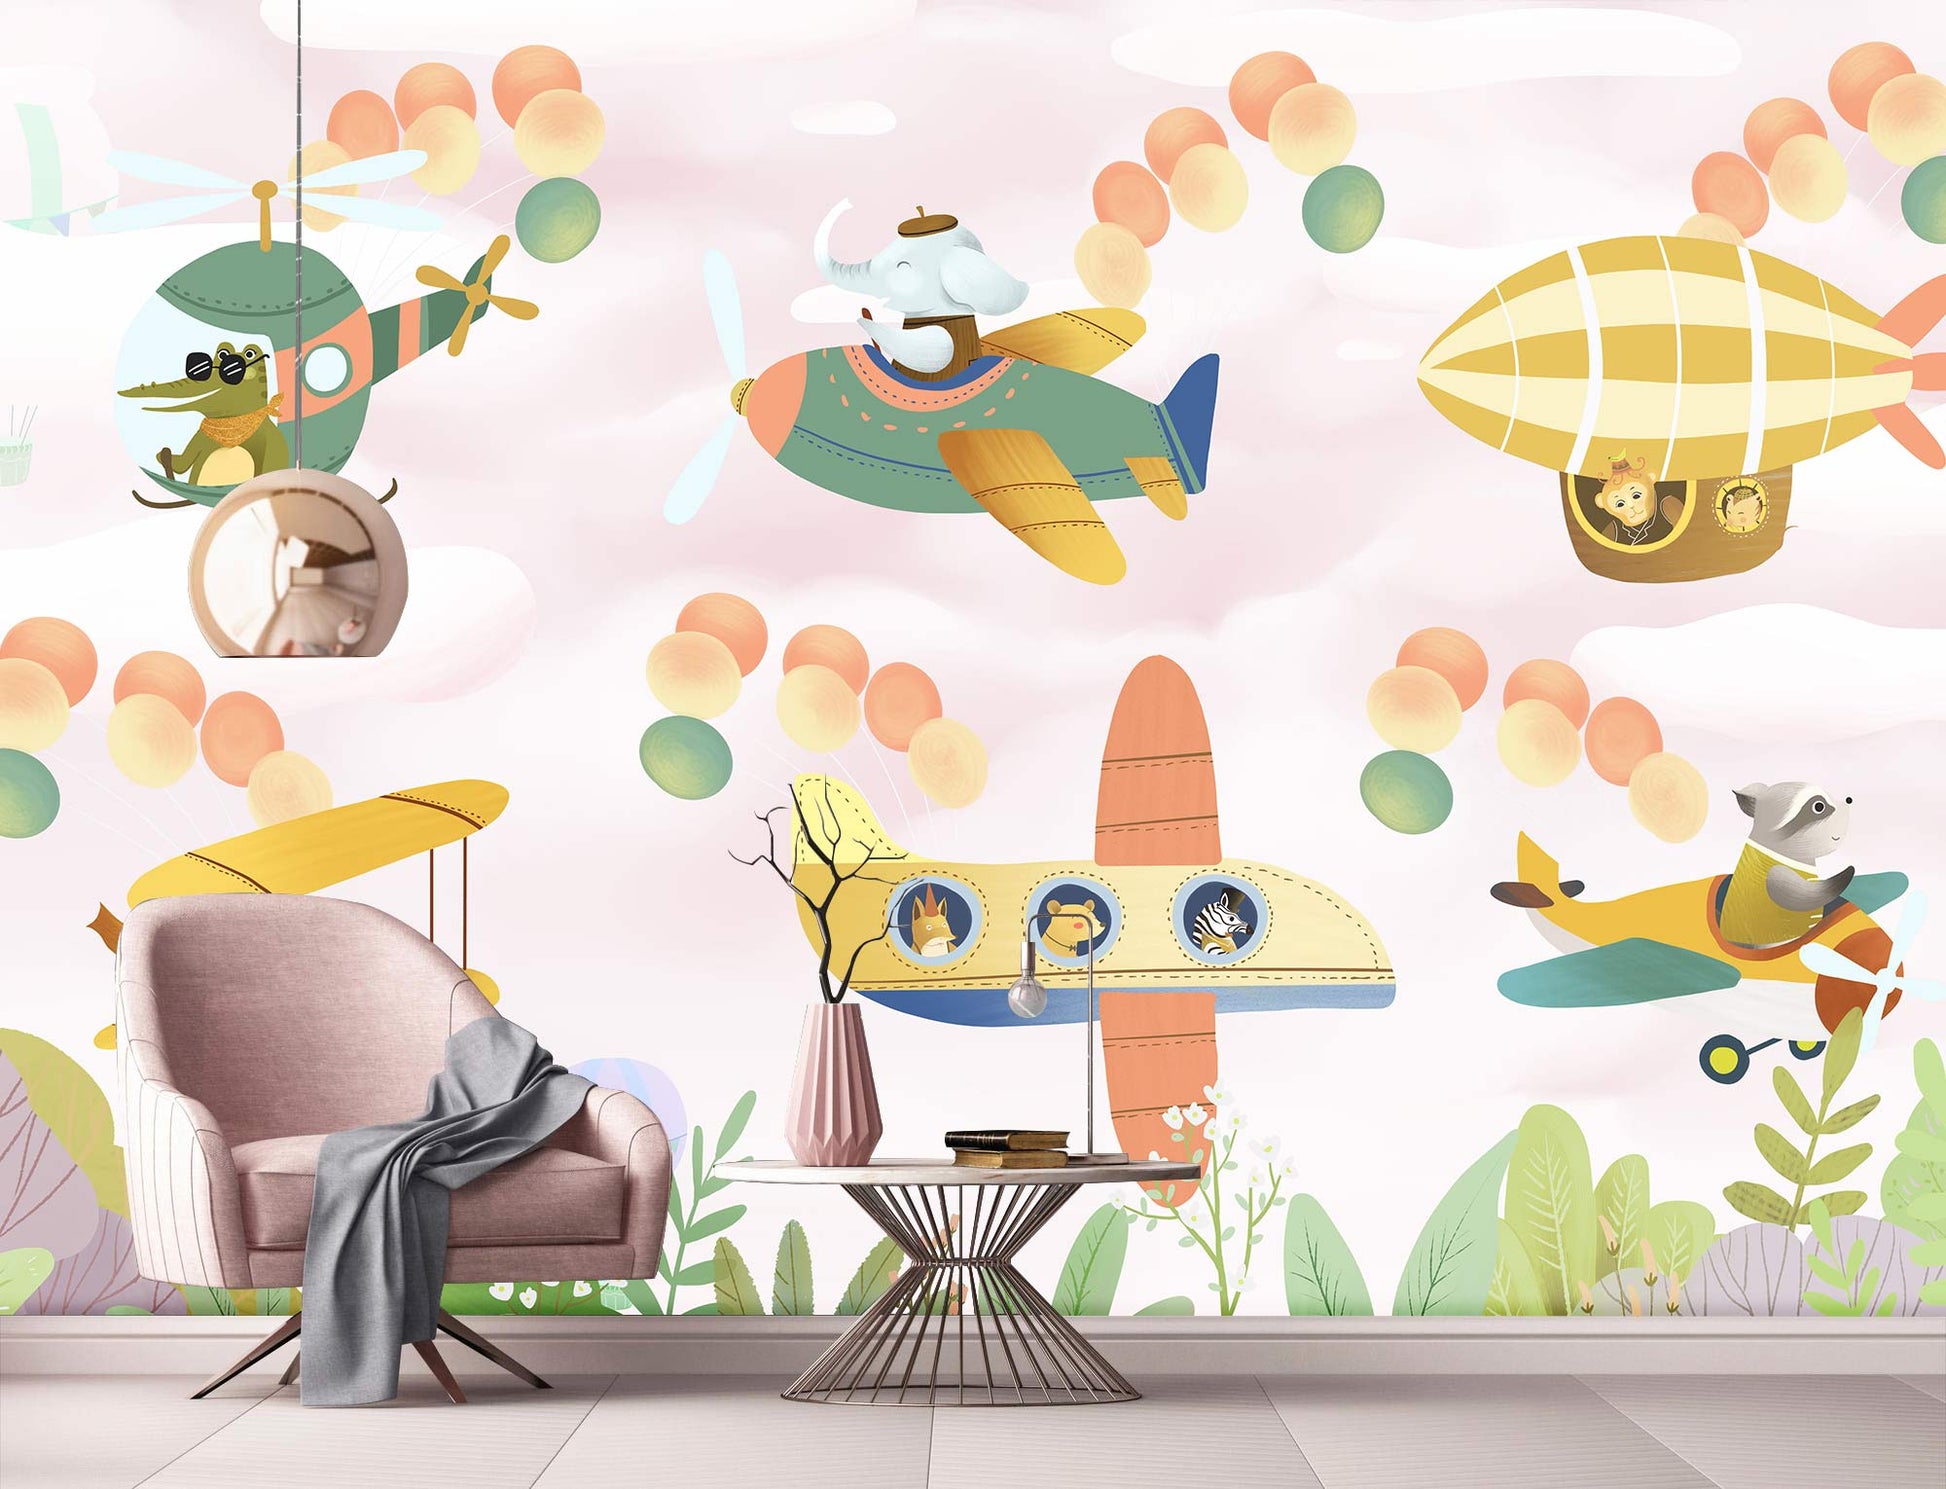 Hallway Decoration Featuring a Cartoon Wall Mural with Animals Flying Planes